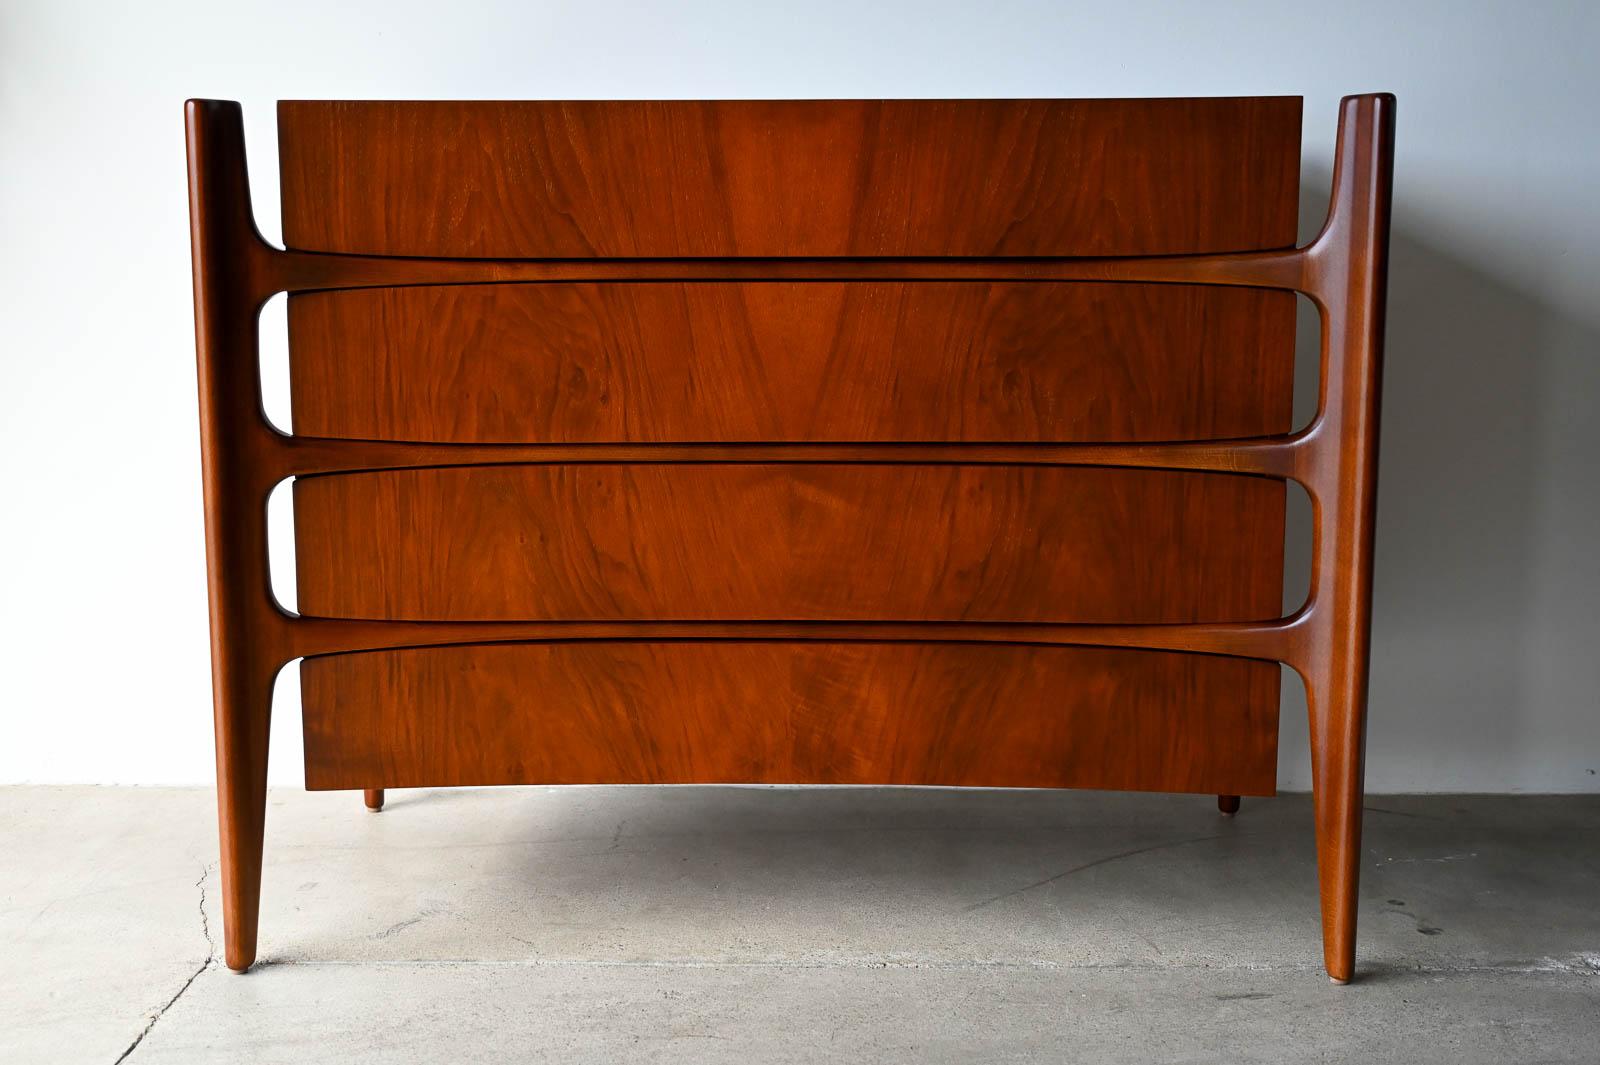 William Hinn  Drawer Chest of Drawers or Cabinet, ca. 1960.  Beautiful 4 drawer cabinet or chest of drawers has a been professionally restored in showroom condition.  Gorgeous walnut grain with floating frame and sculpted legs.  Exceptional piece